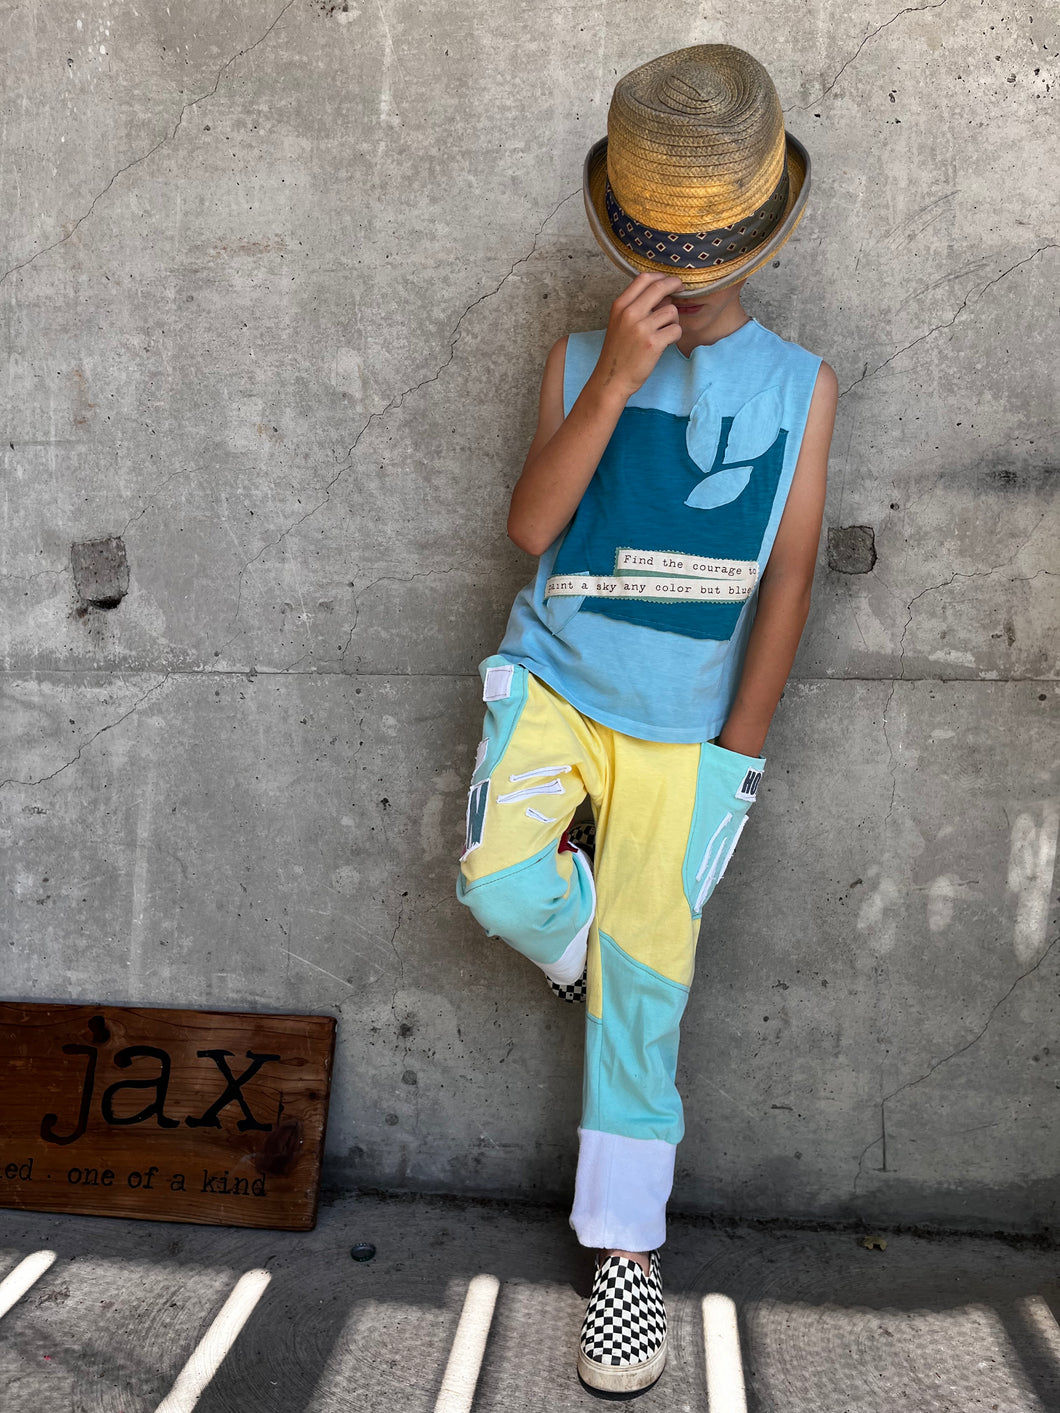 Upcycled from salvaged tee shirts and salvaged graphic word tees. All about comfort, all about being HONOR, and definitely all about being SEEN.   Handcrafted with love and intention.   Handmade in Santa Cruz, CA One-of-a-kind Conscious vibes Pocket for magical finds  Size 7-8 youth 